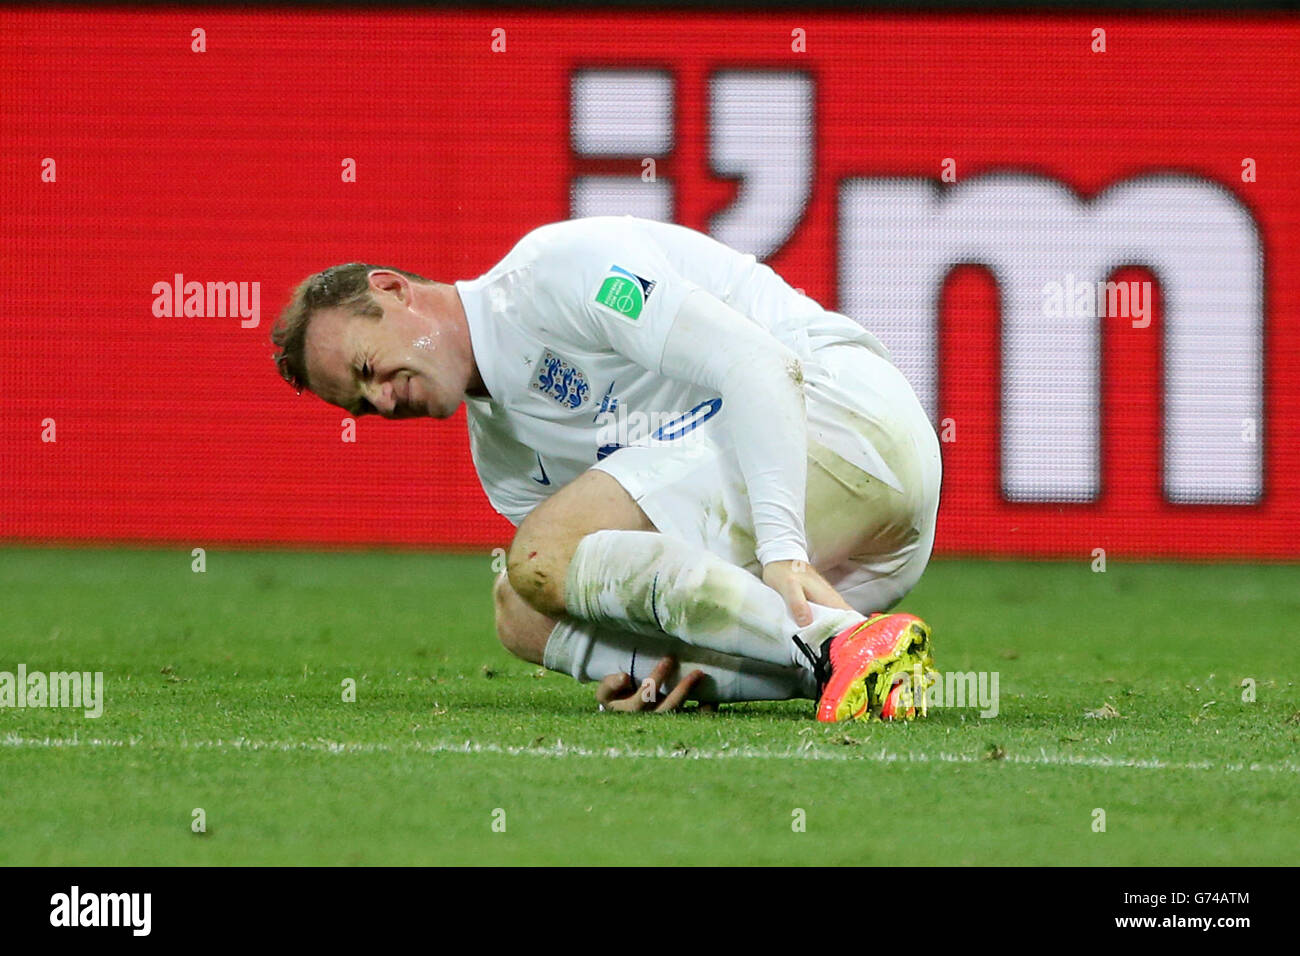 England's Wayne Rooney goes down clutching his ankle during the Group D match the Estadio do Sao Paulo, Sao Paulo, Brazil. Stock Photo